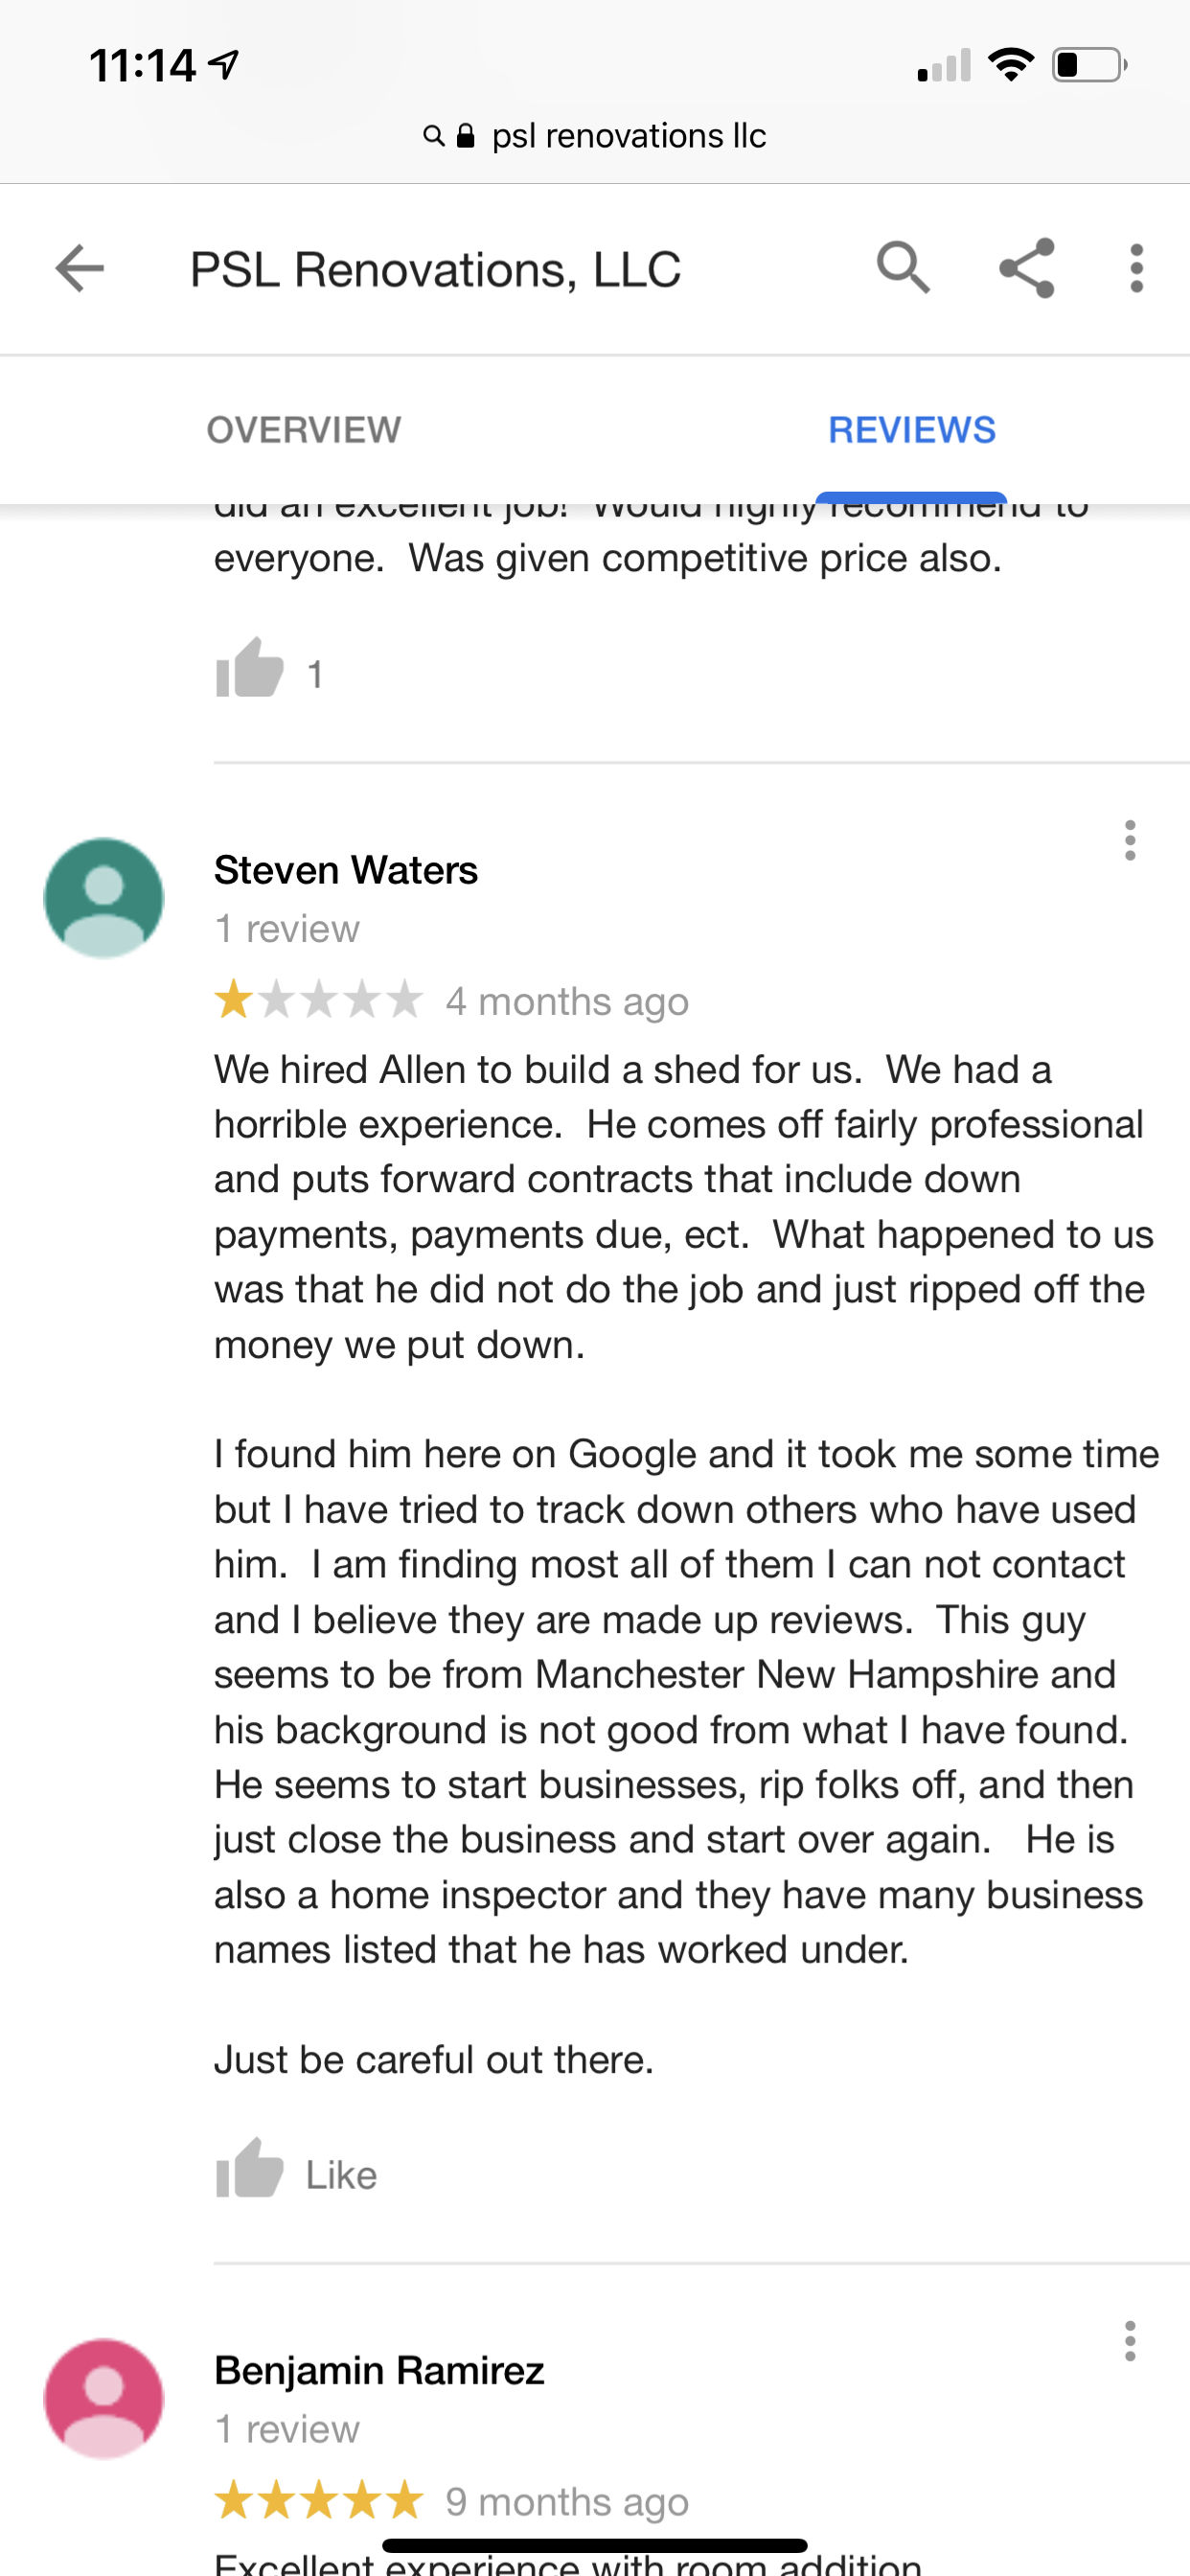 Negative reviews from google users 